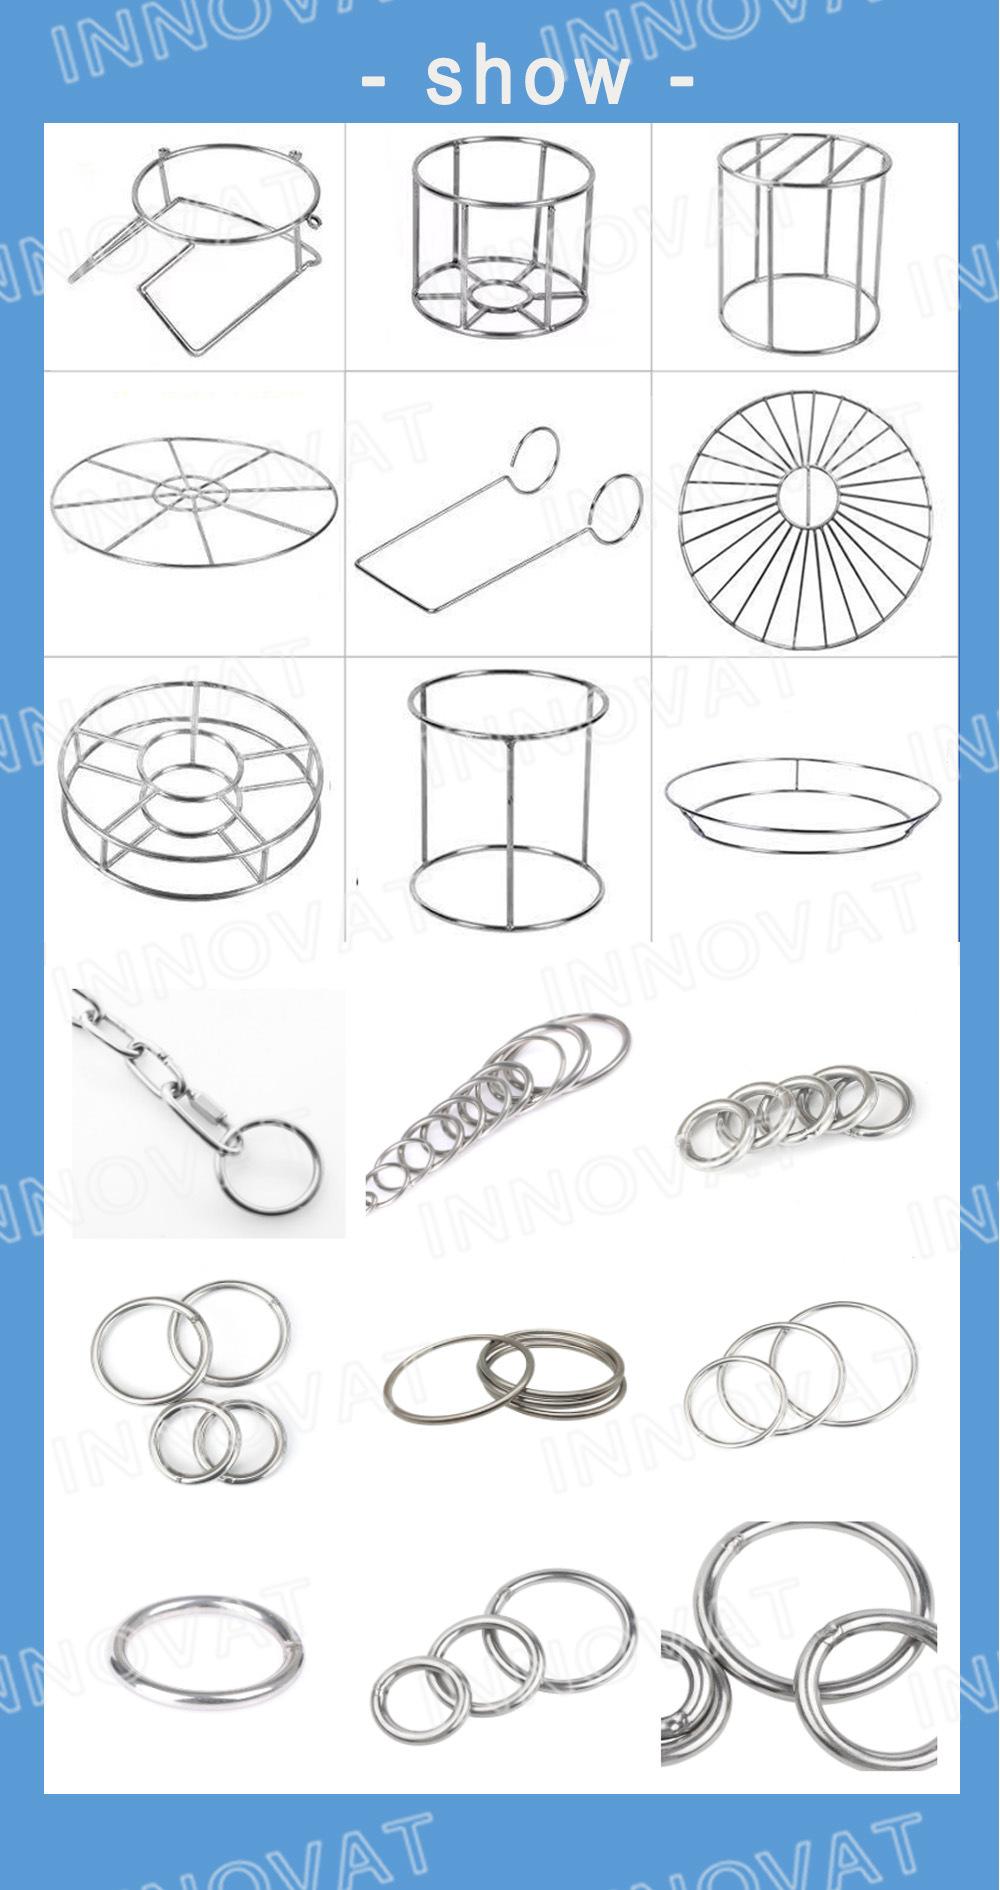 Insulation Accessories Round Sharp Stainless Steel Weld O Lacing Ring